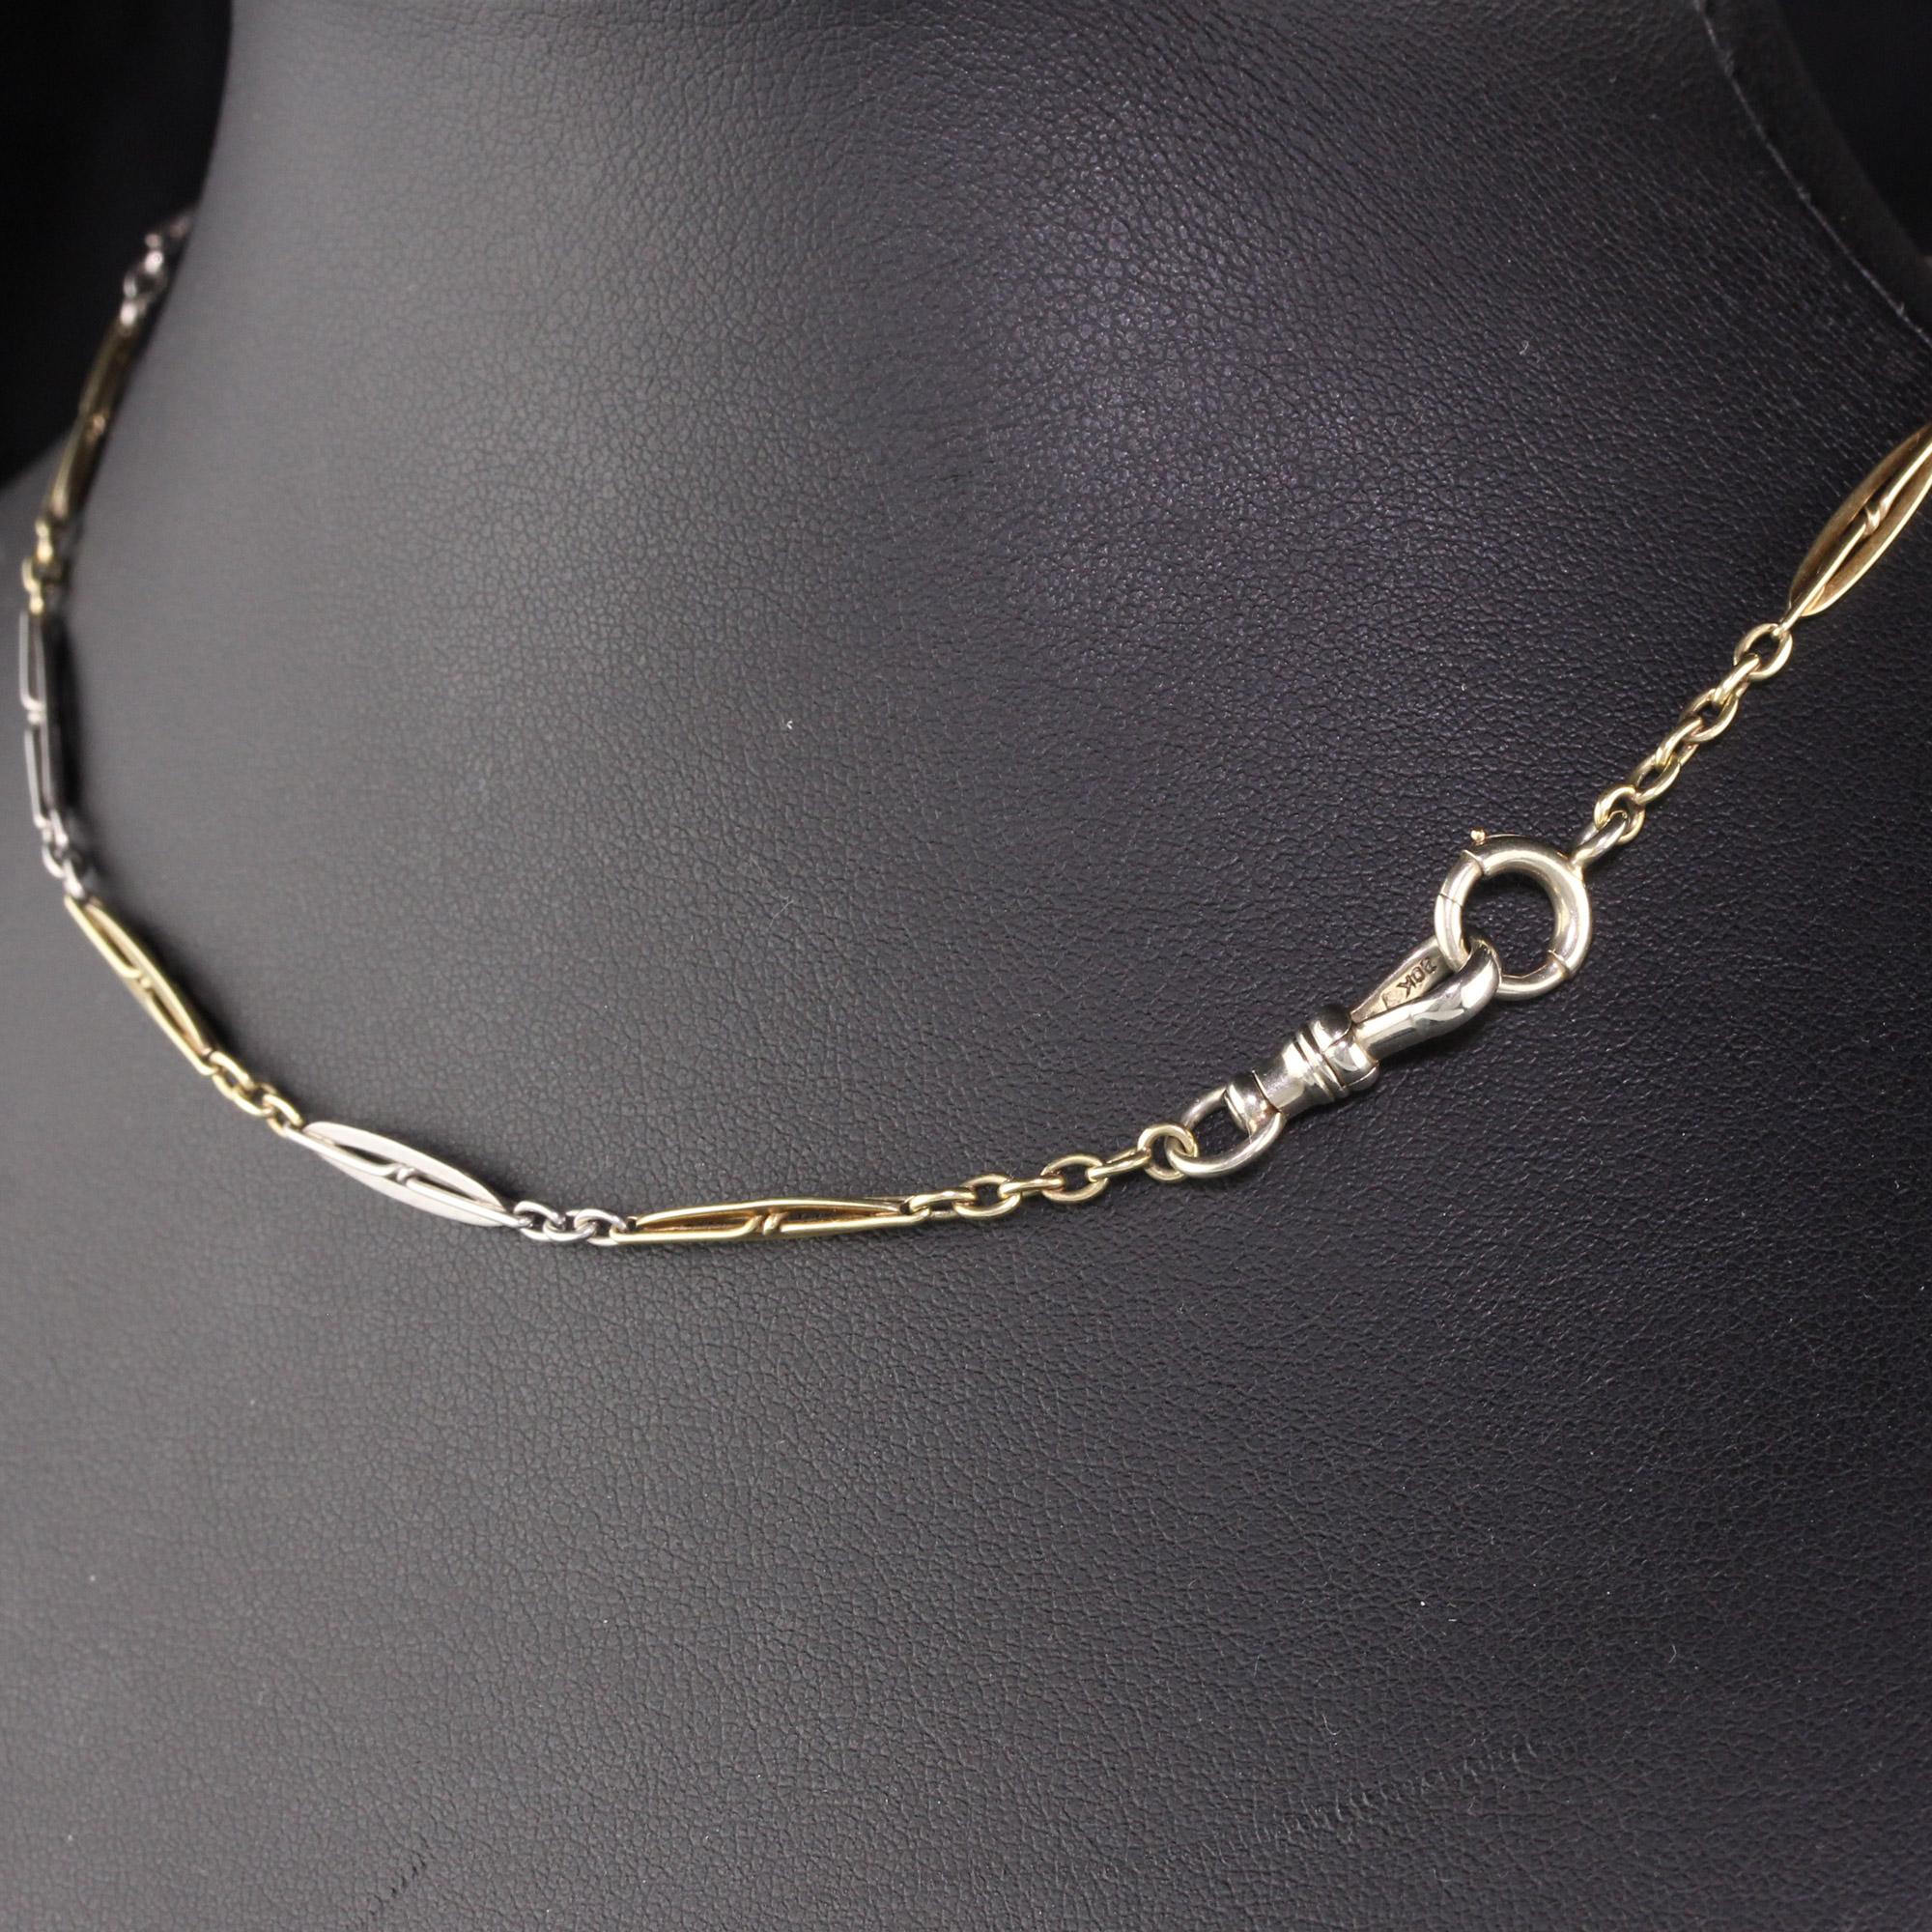 Antique Art Deco 18K Yellow Gold and Platinum Link Necklace / Watch Fob ...